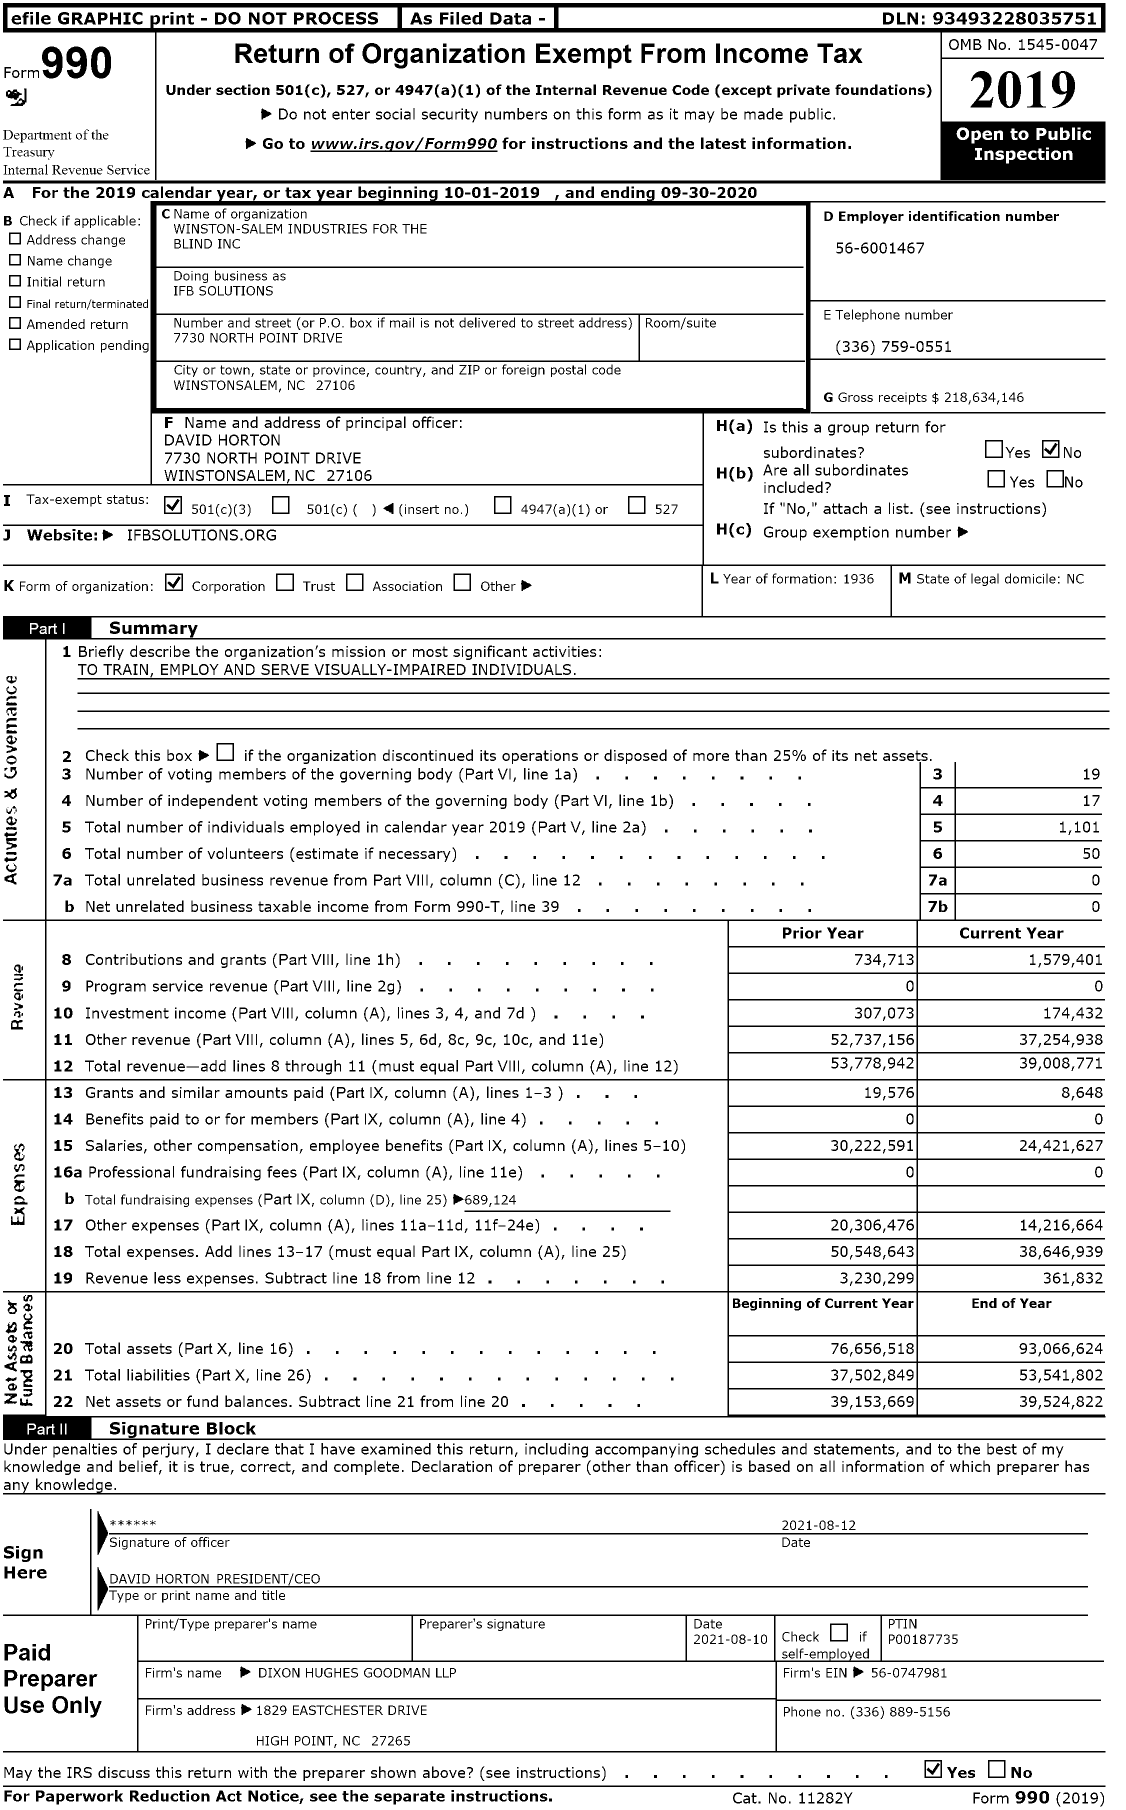 Image of first page of 2019 Form 990 for Ifb Solutions (IFB)